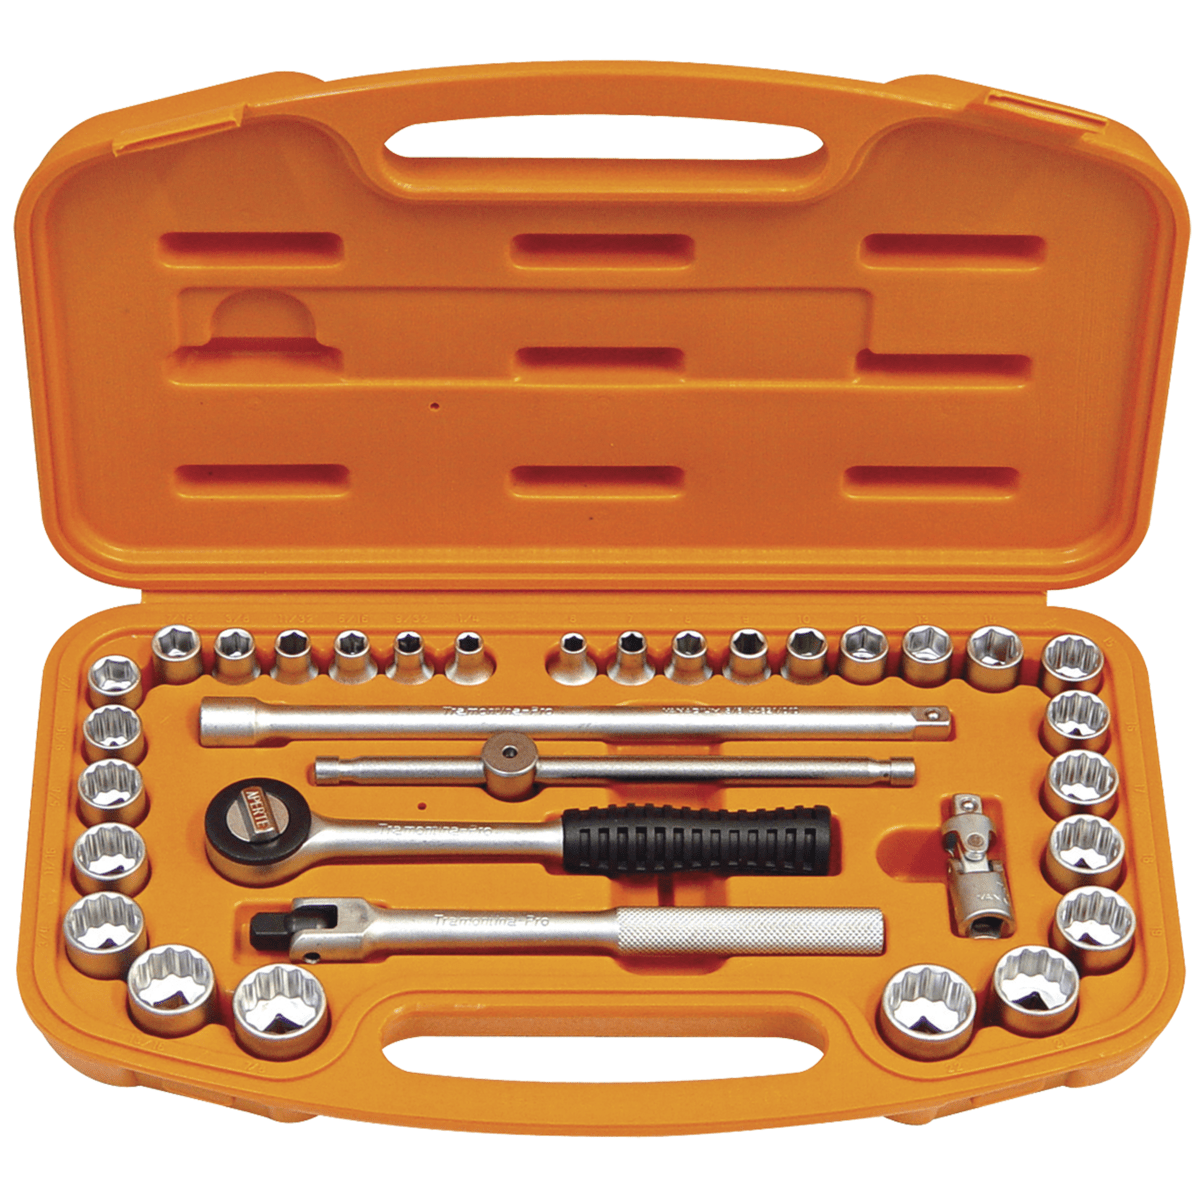 Tramontina 3/8" Inches and Millimeters Socket and Accessories Set - 33 pieces